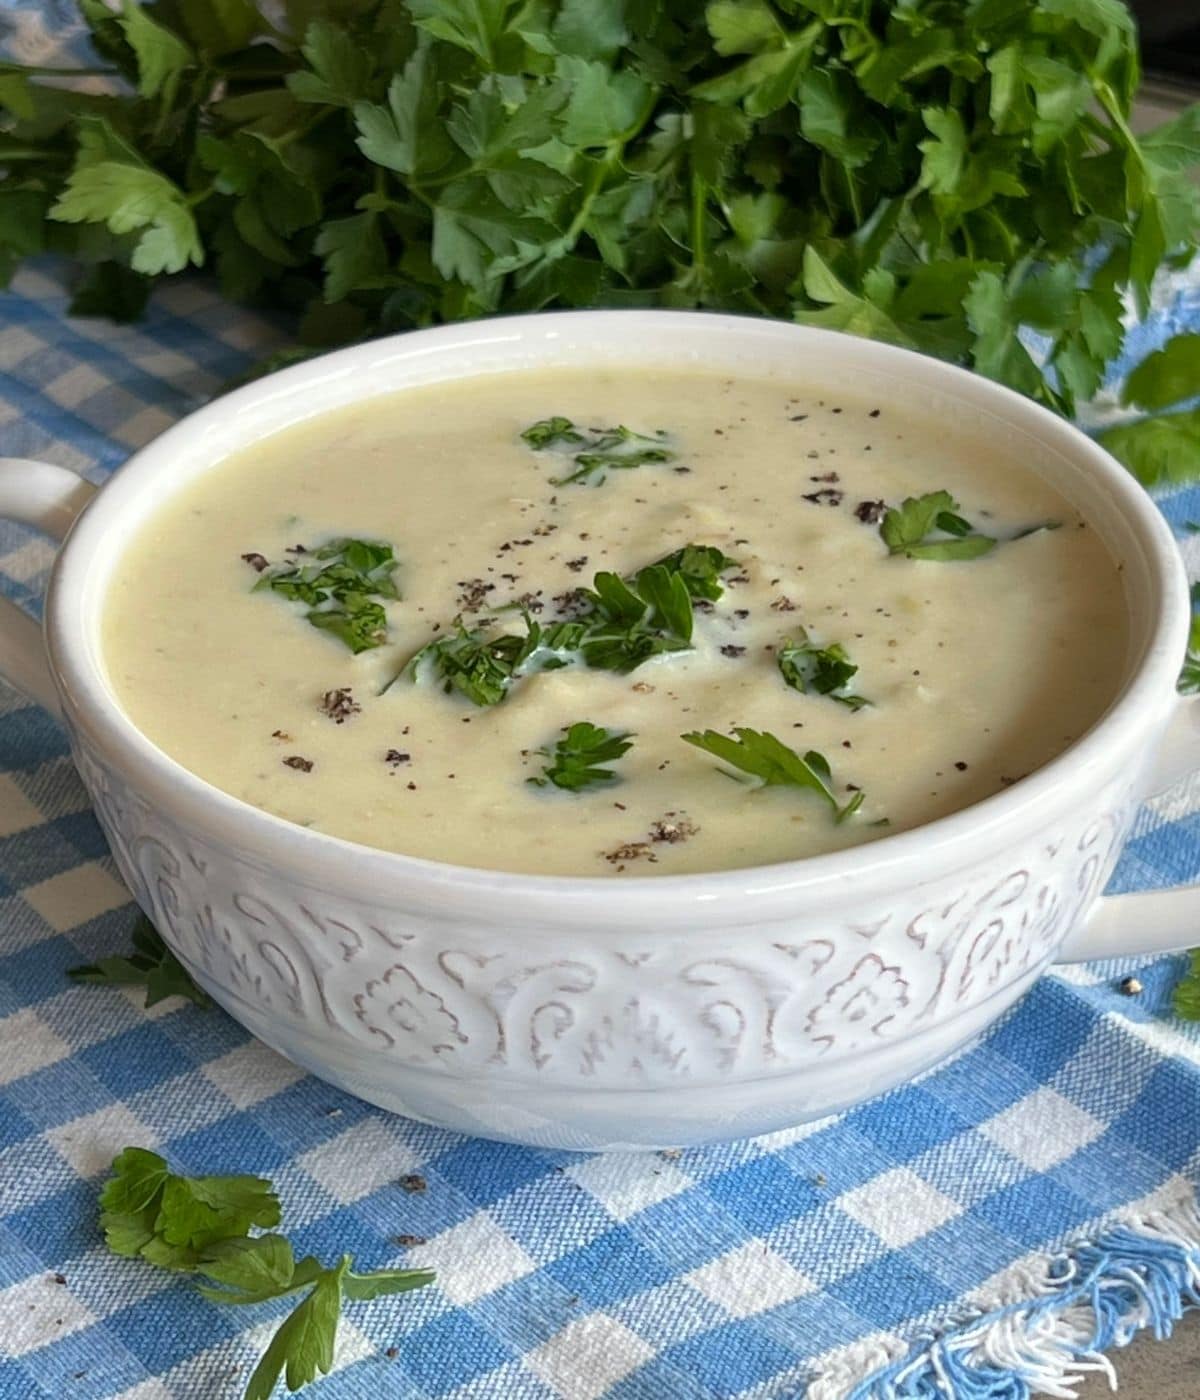 White bowl with Scottish smoked haddock soup garnished with parsley and parsley in the background.